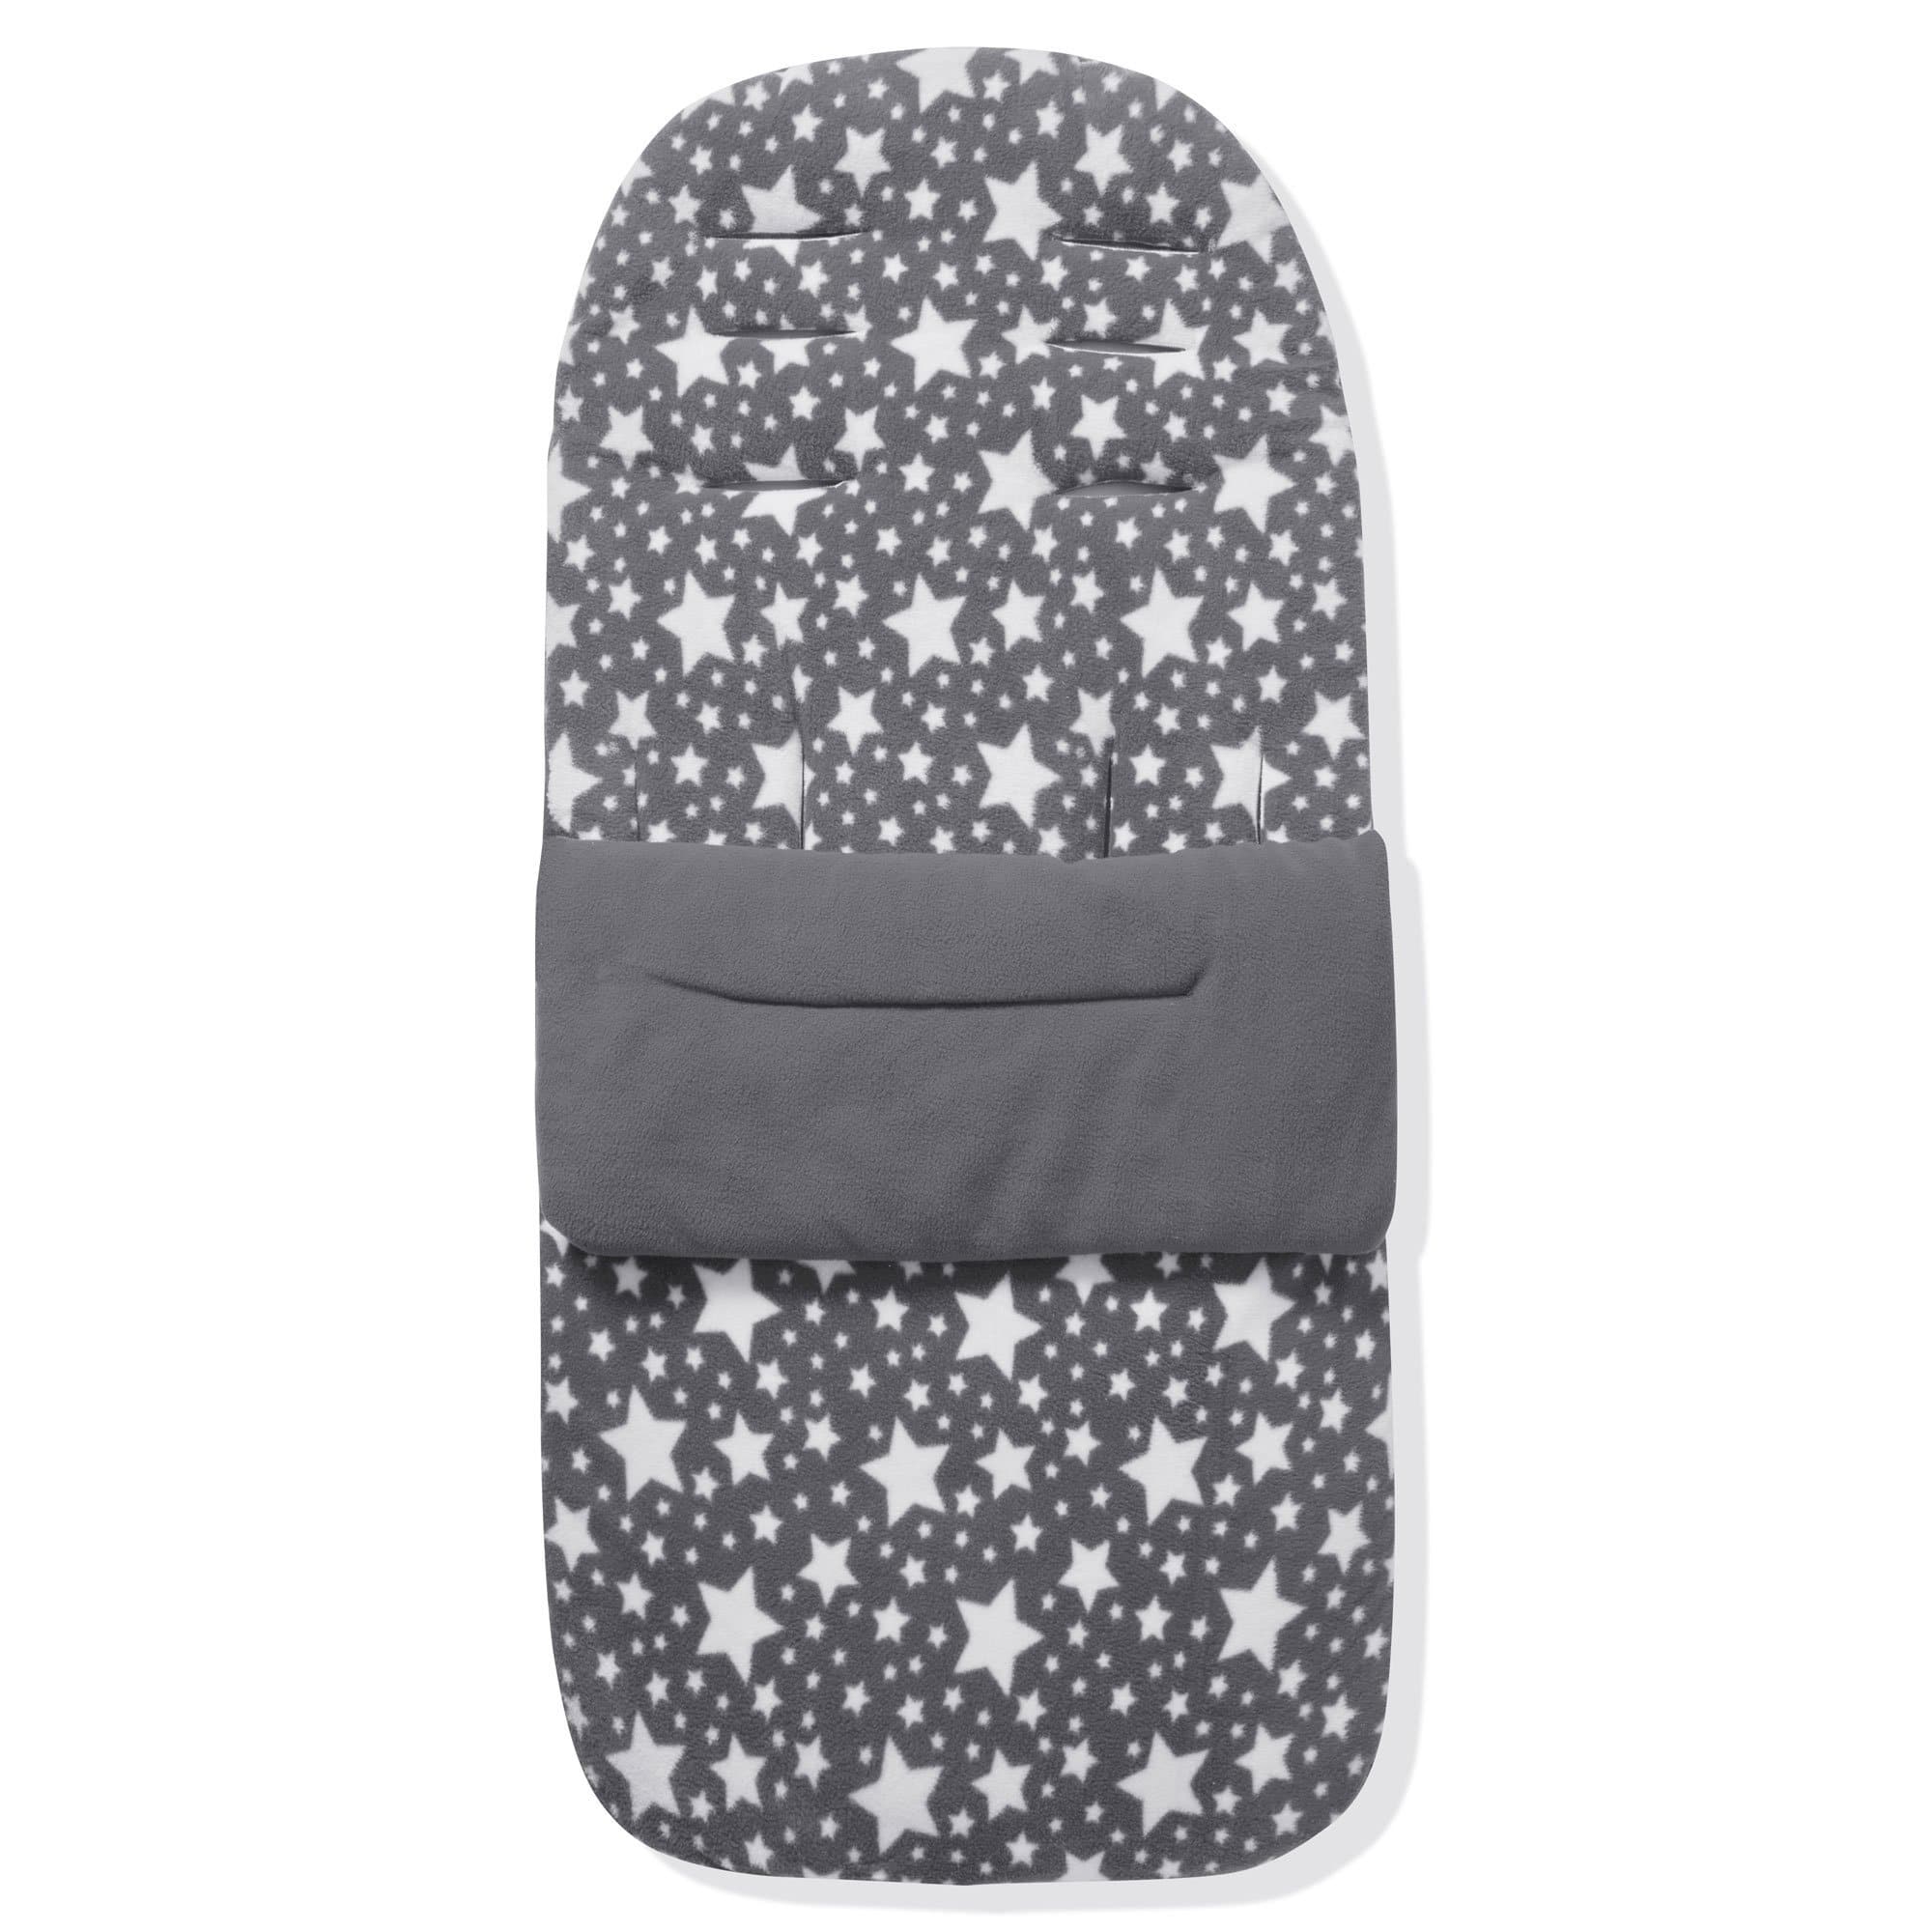 Fleece Footmuff / Cosy Toes Compatible with TFK - Grey Star / Fits All Models | For Your Little One